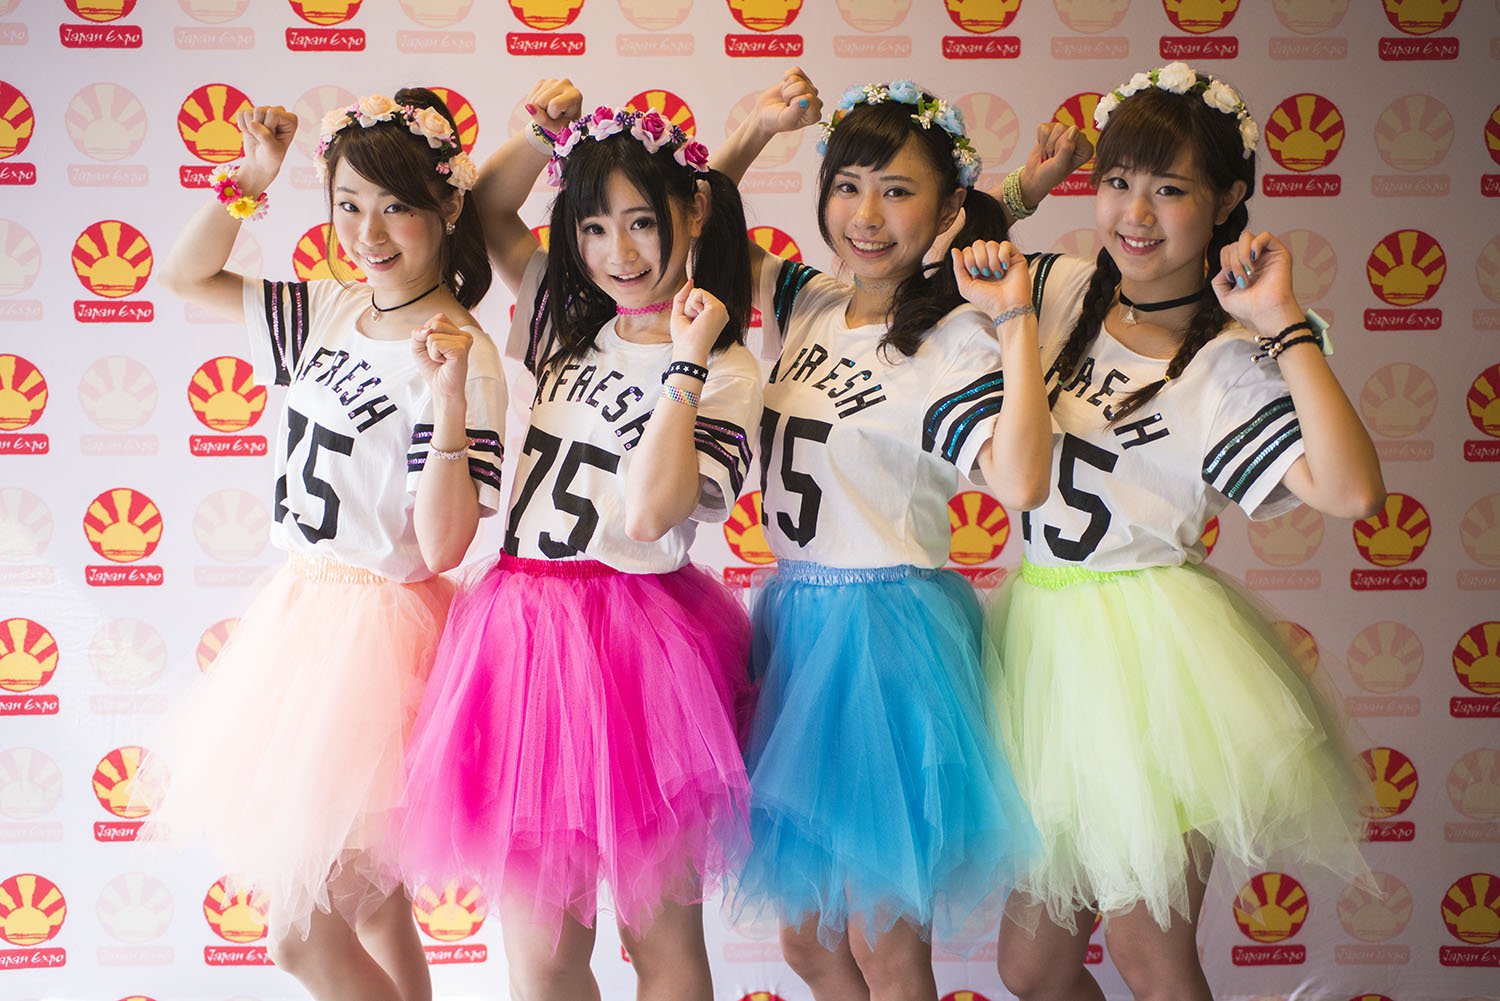 Comment Video from Osaka Local Idol Group Chaw Chaw at Japan Expo 2015 in Paris!